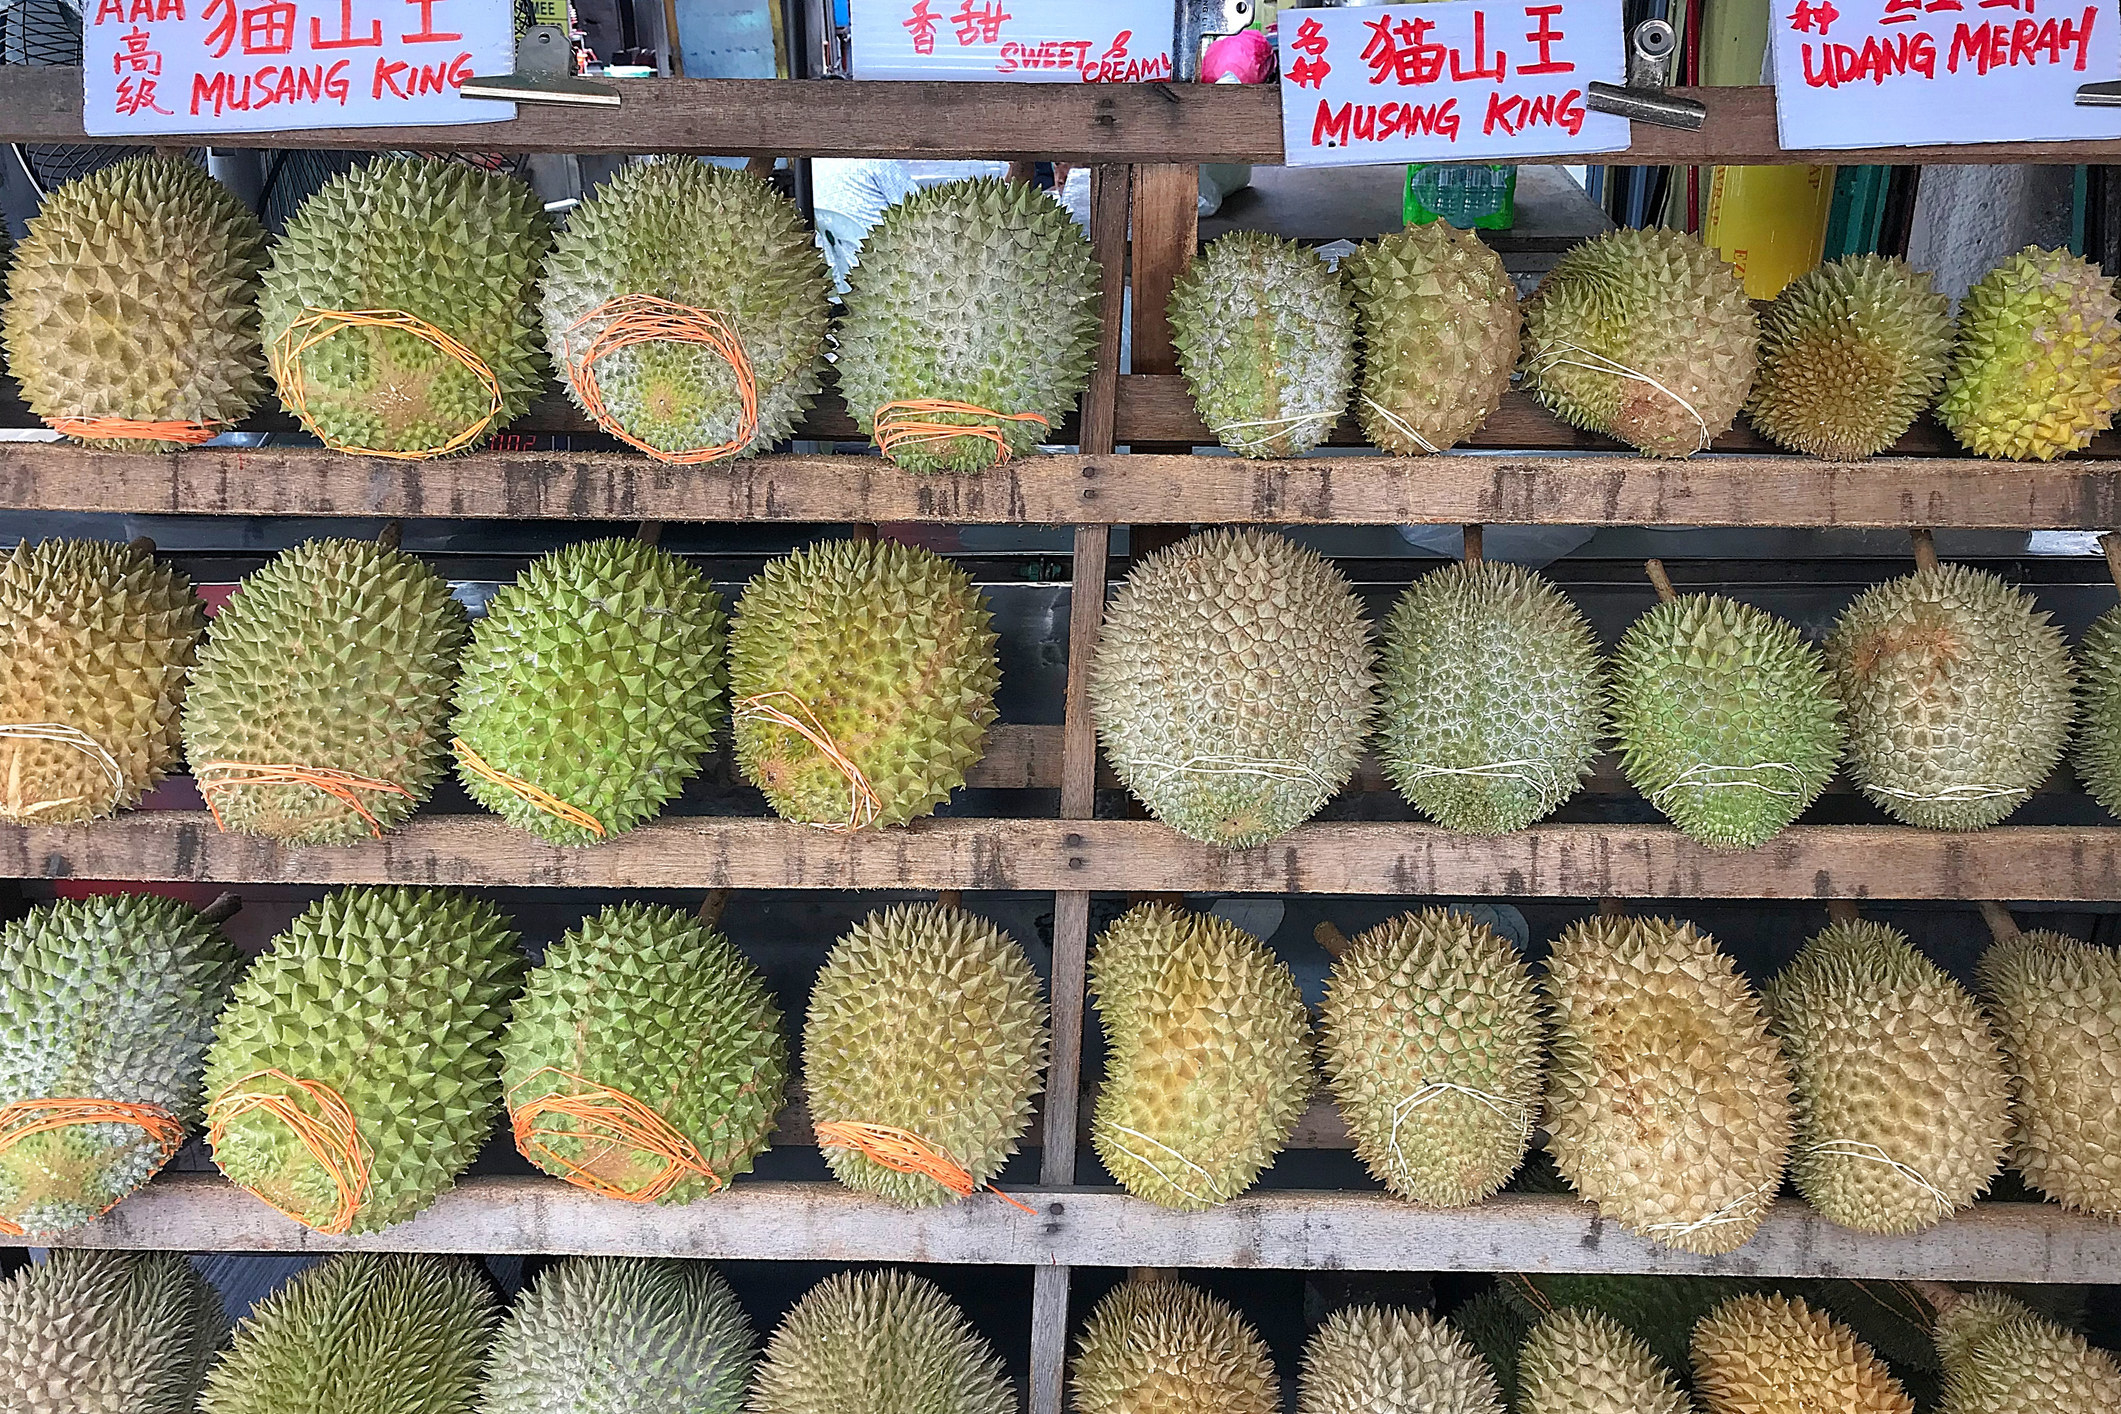 A street stall lined with durian.